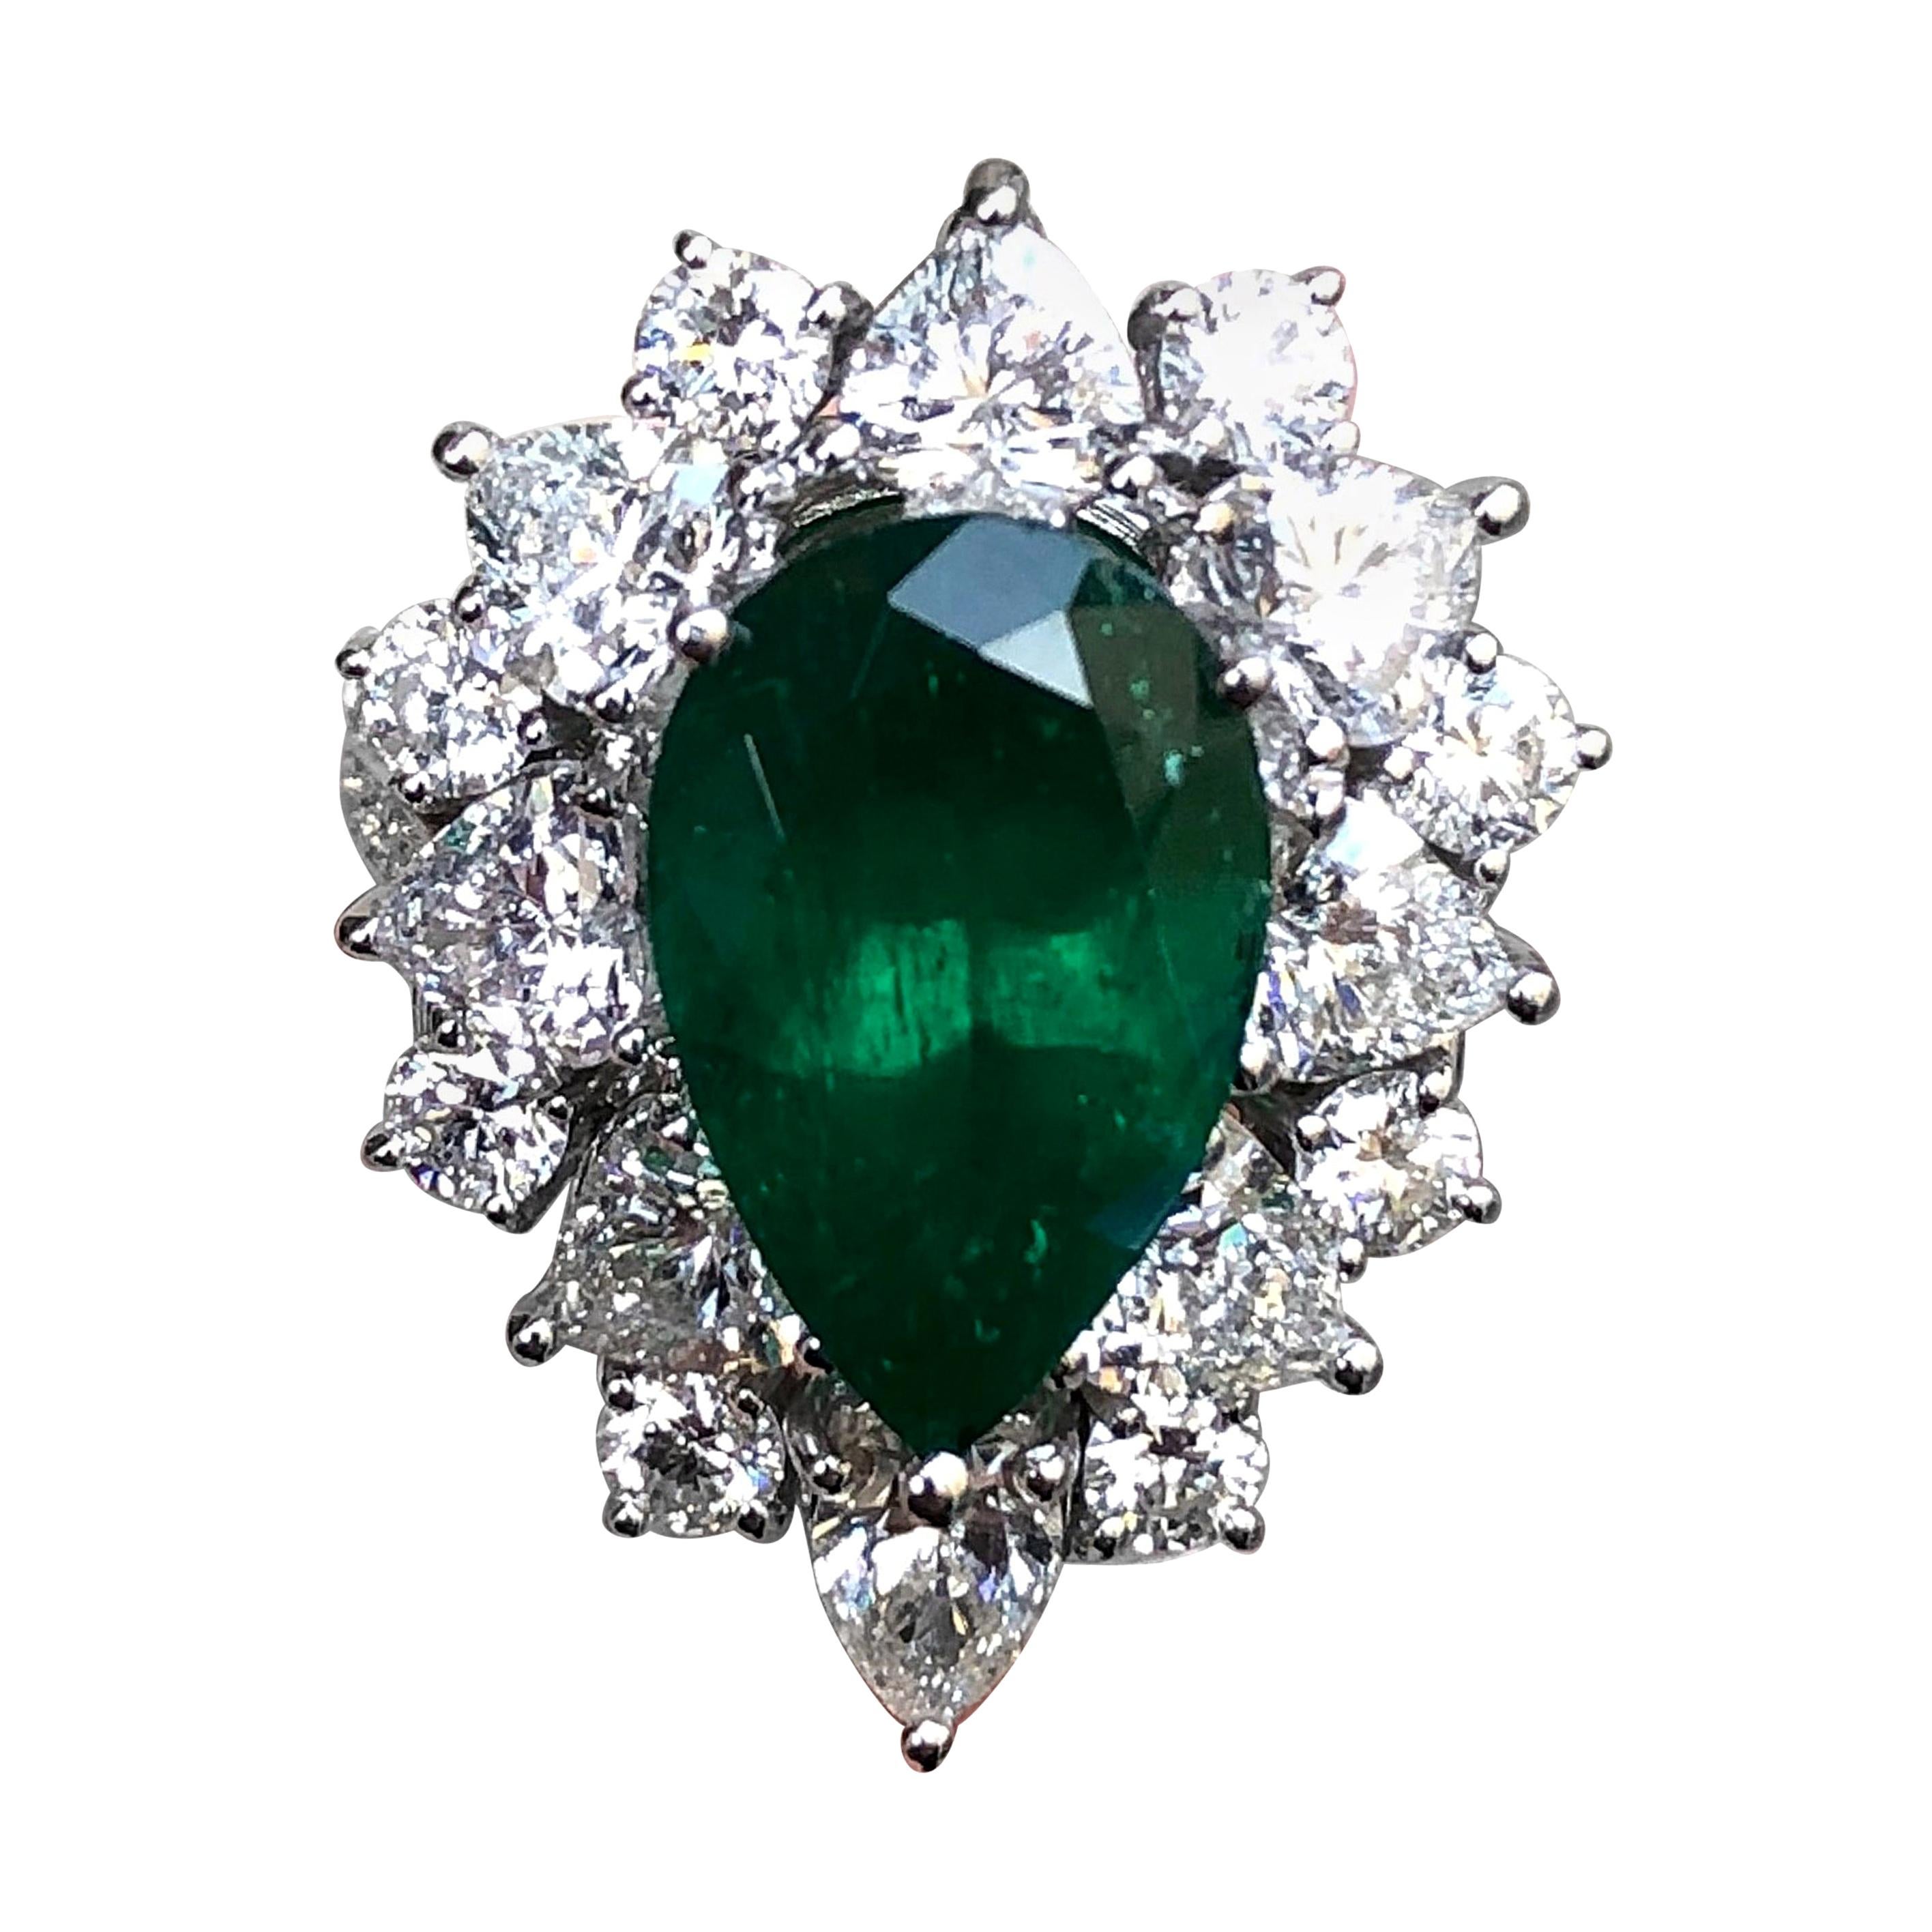 3.95 Carat Pear Cut Colombian Emerald Ring with Detachable Diamond Adorned Shank For Sale